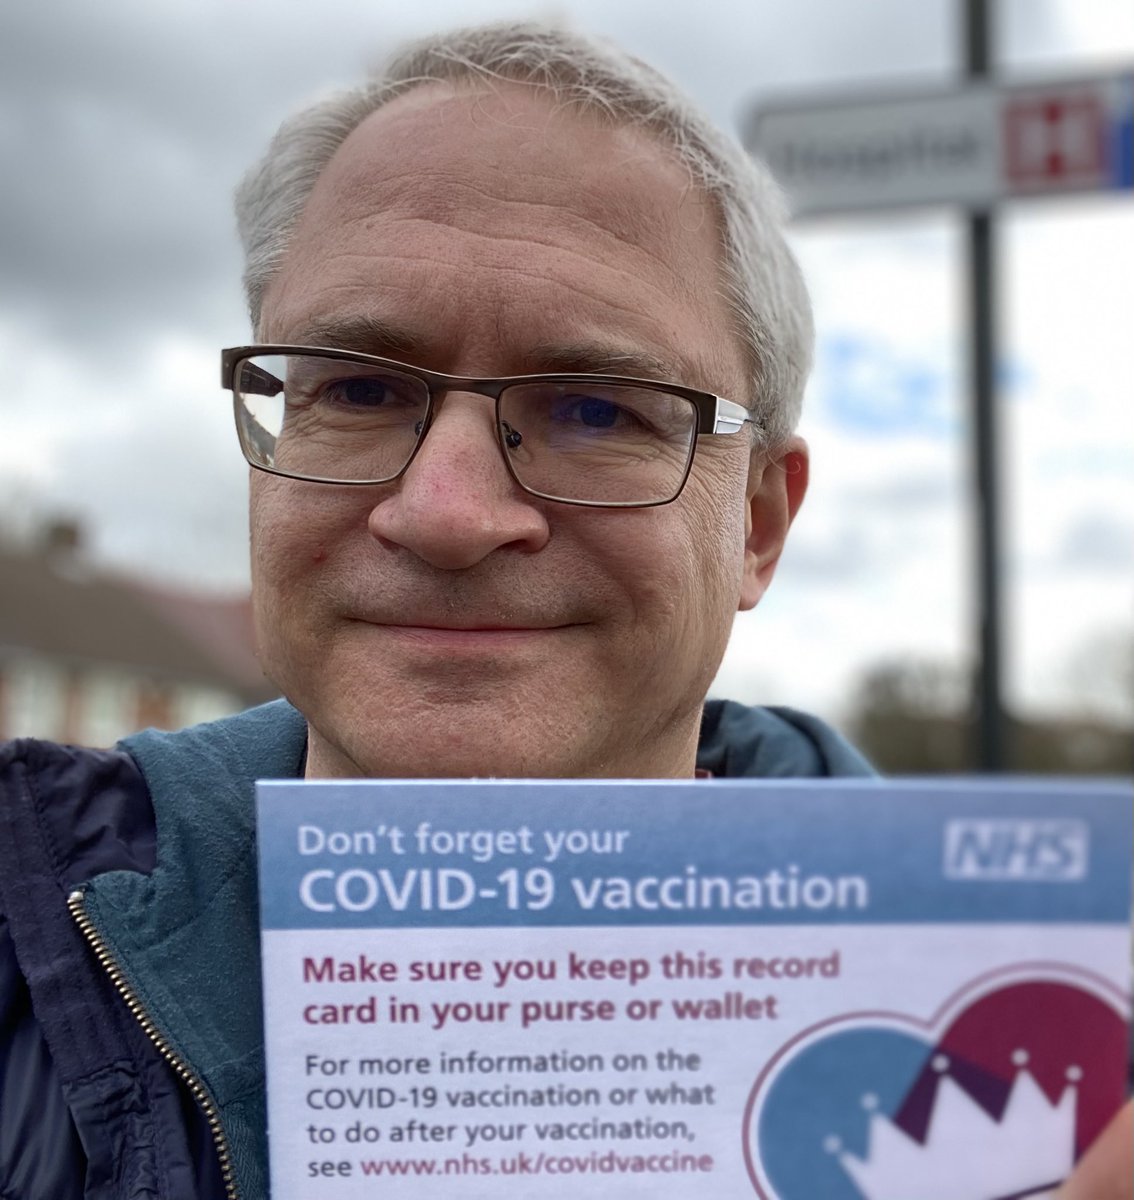 Immensely grateful for the incredible scientists who got us this far in a year, to the wonderful #NHS & to those that had the foresight to order enough vaccines for all the UK. We can also help other countries by giving towards the rollout. #GetOneGiveOne covaxamc.ctdonate.org